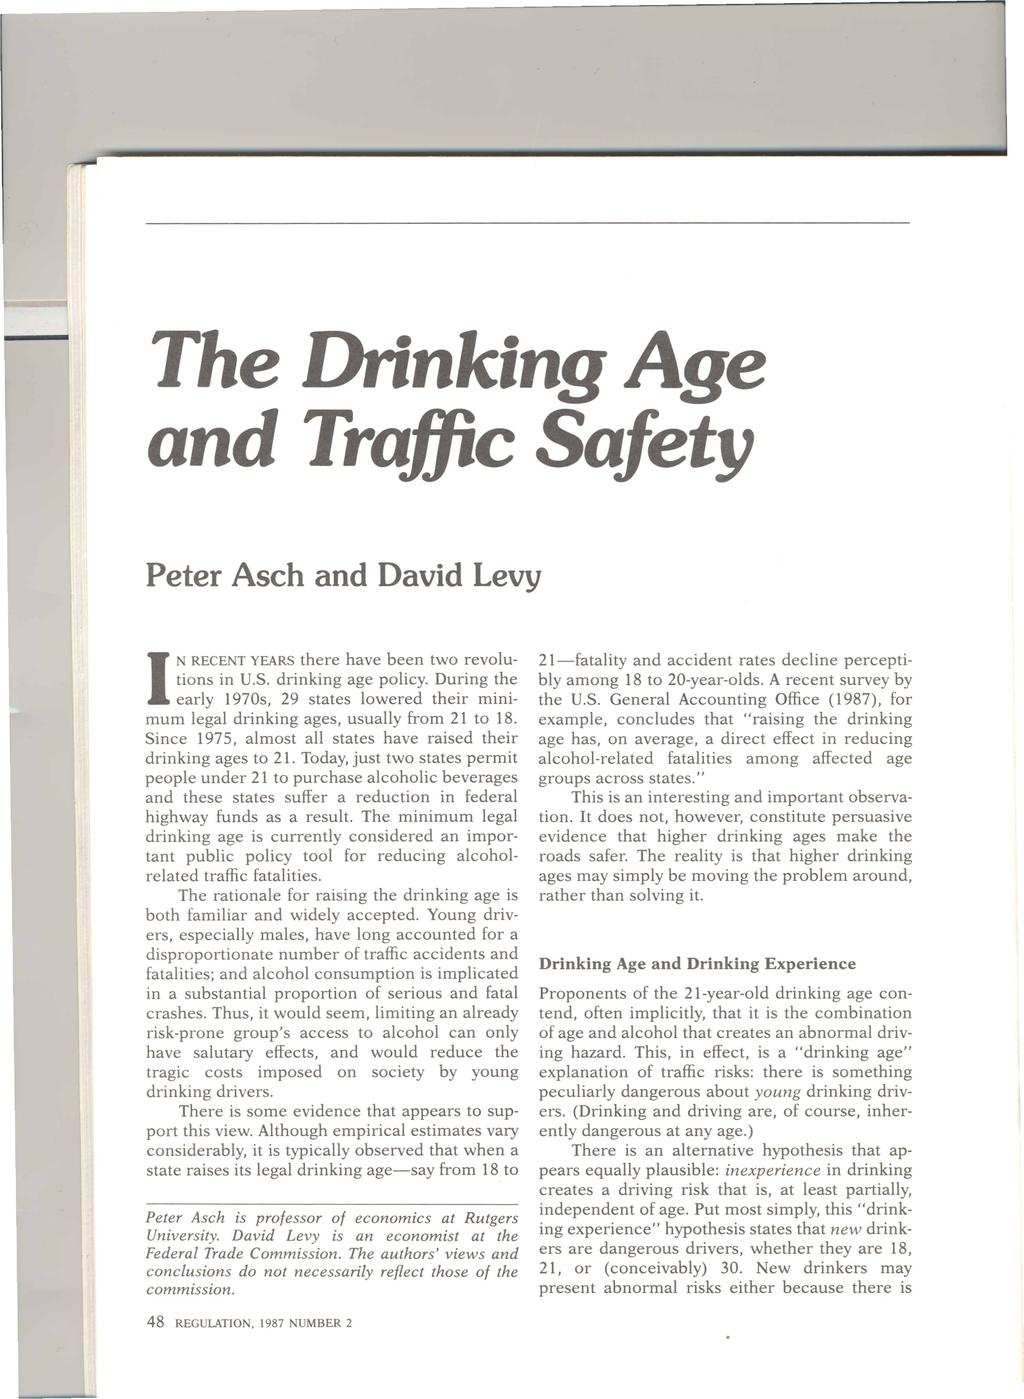 The Drinking Age and TrafficSafety Peter Asch and David Levy INRECENT YEARS there have been two revolutions in U.S. drinking age policy.